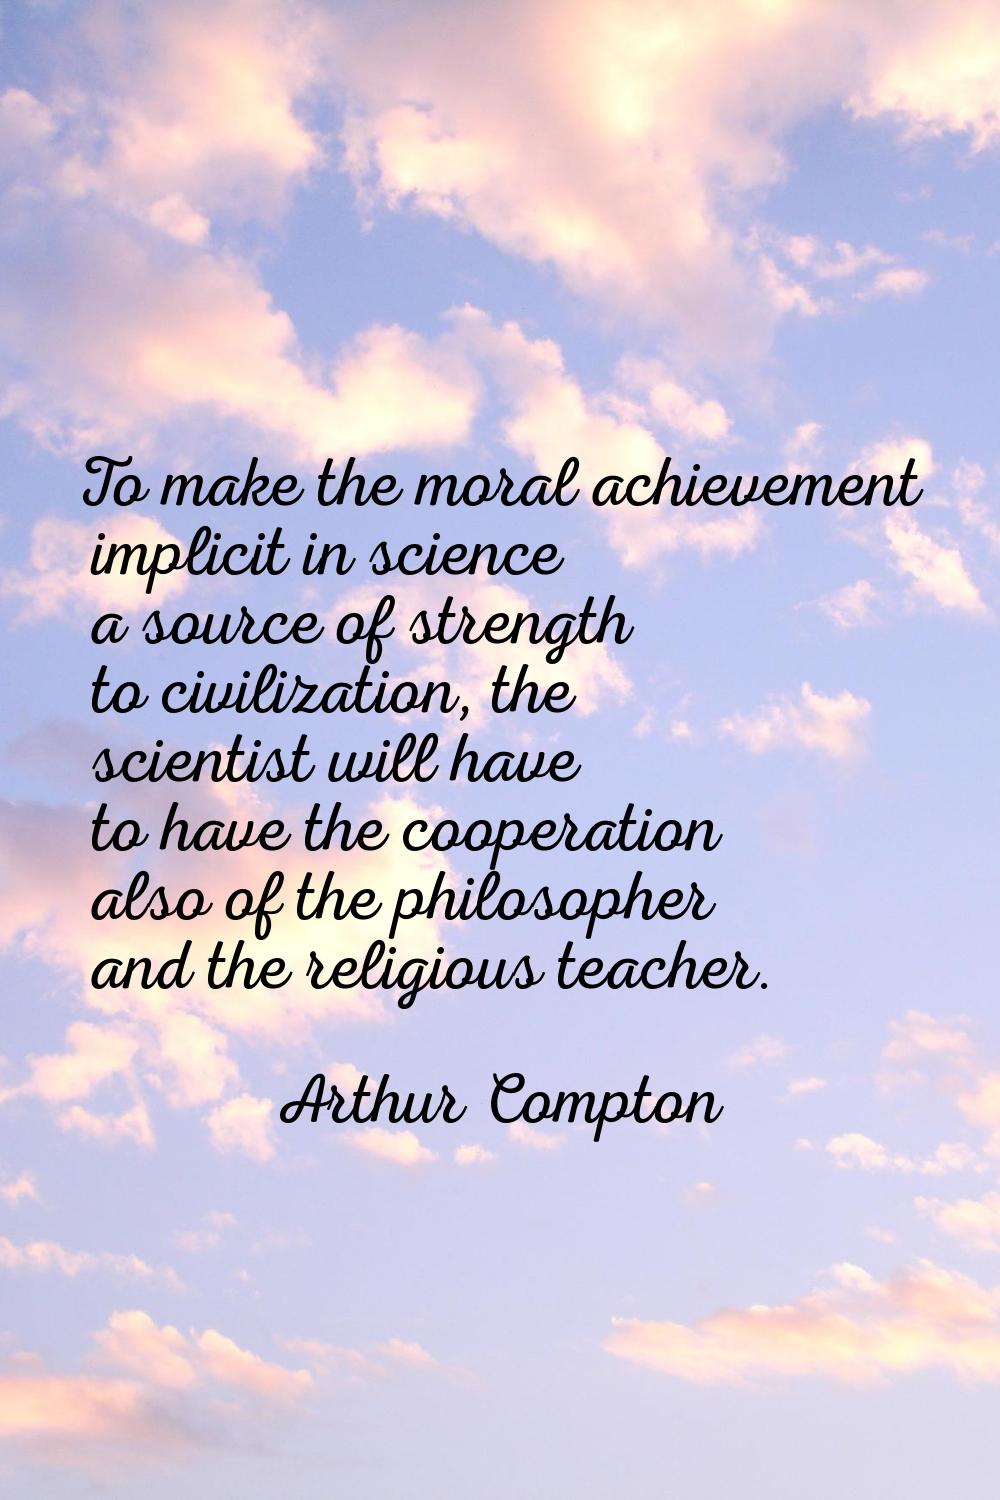 To make the moral achievement implicit in science a source of strength to civilization, the scienti